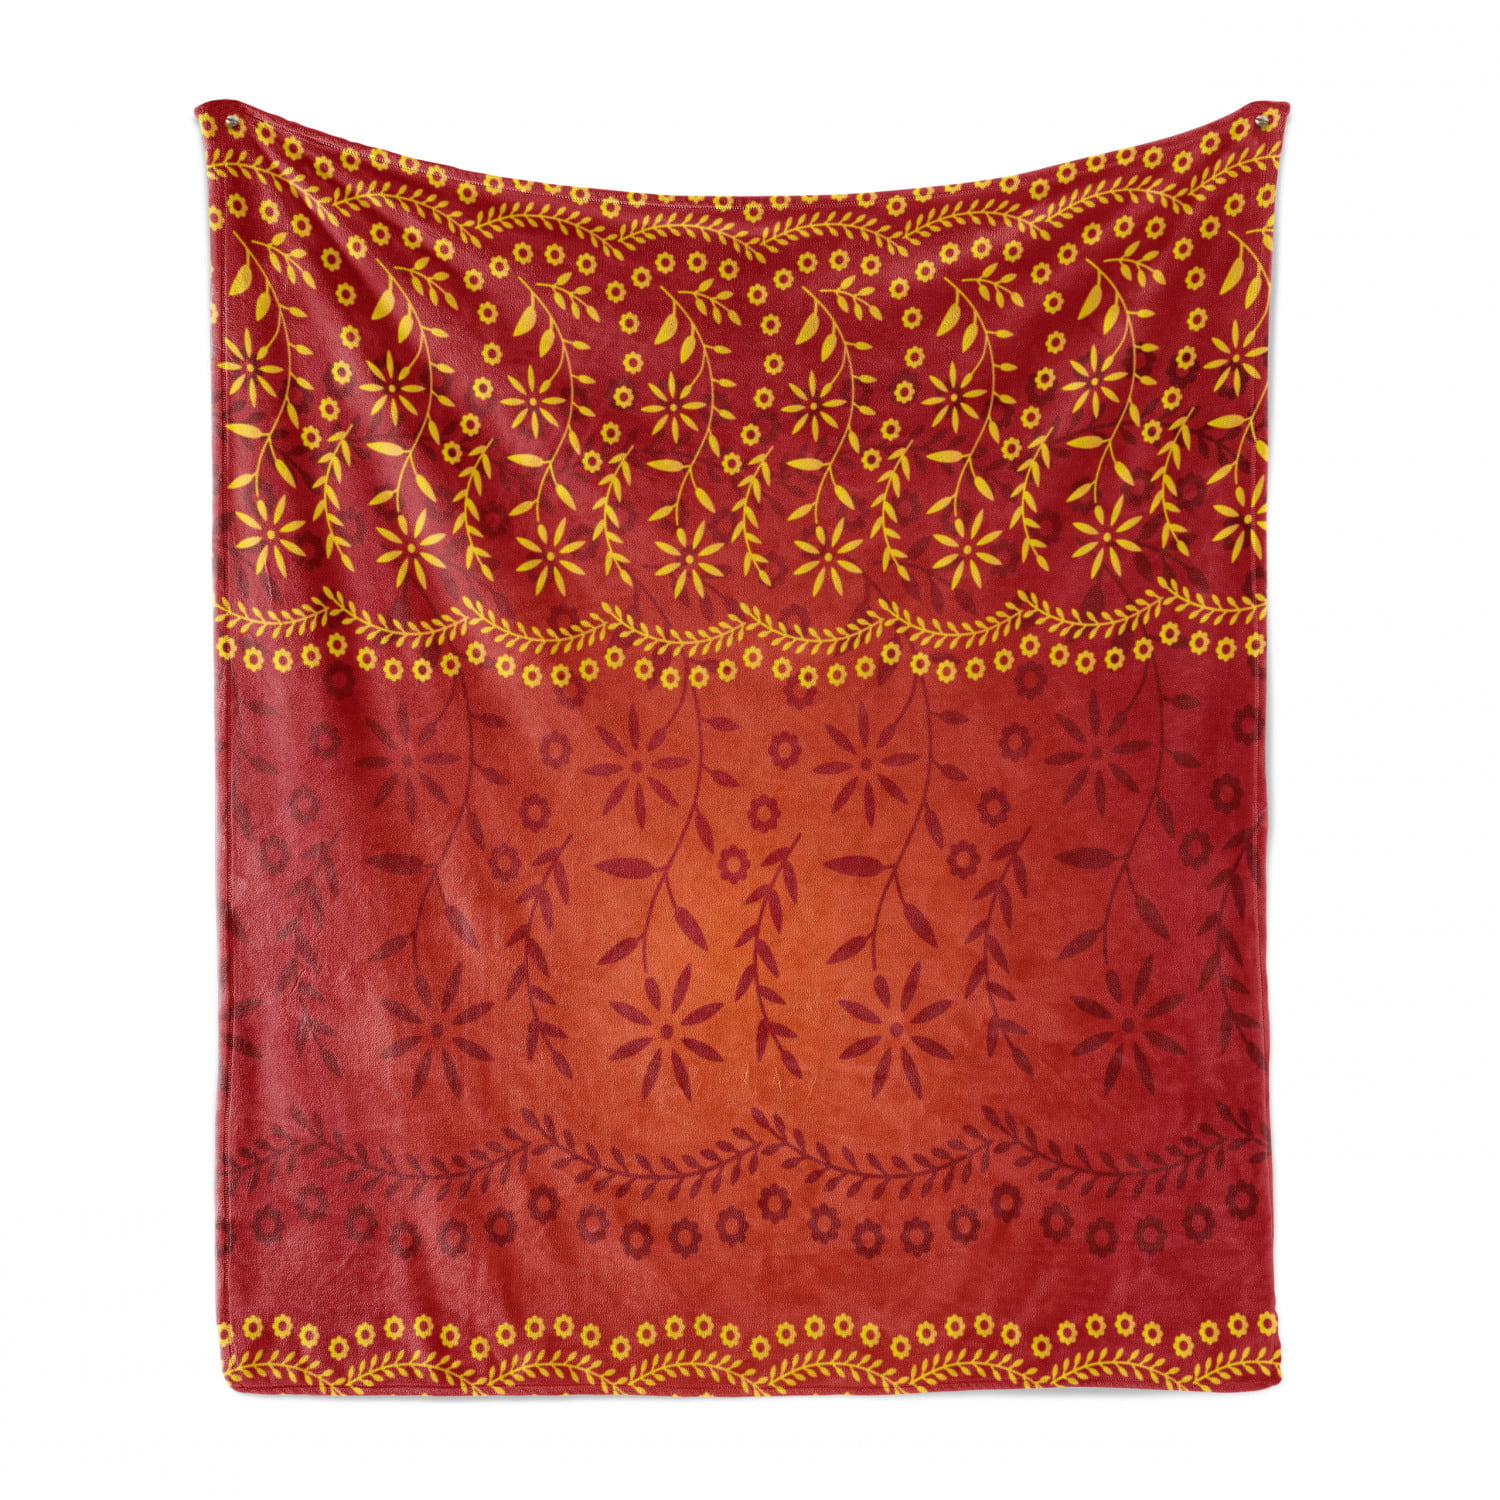 Maroon Teal Old Floral Ornament Pattern with Swirled Florets and Leaf Turkish Artwork 60 x 80 Cozy Plush for Indoor and Outdoor Use Ambesonne Moroccan Soft Flannel Fleece Throw Blanket 